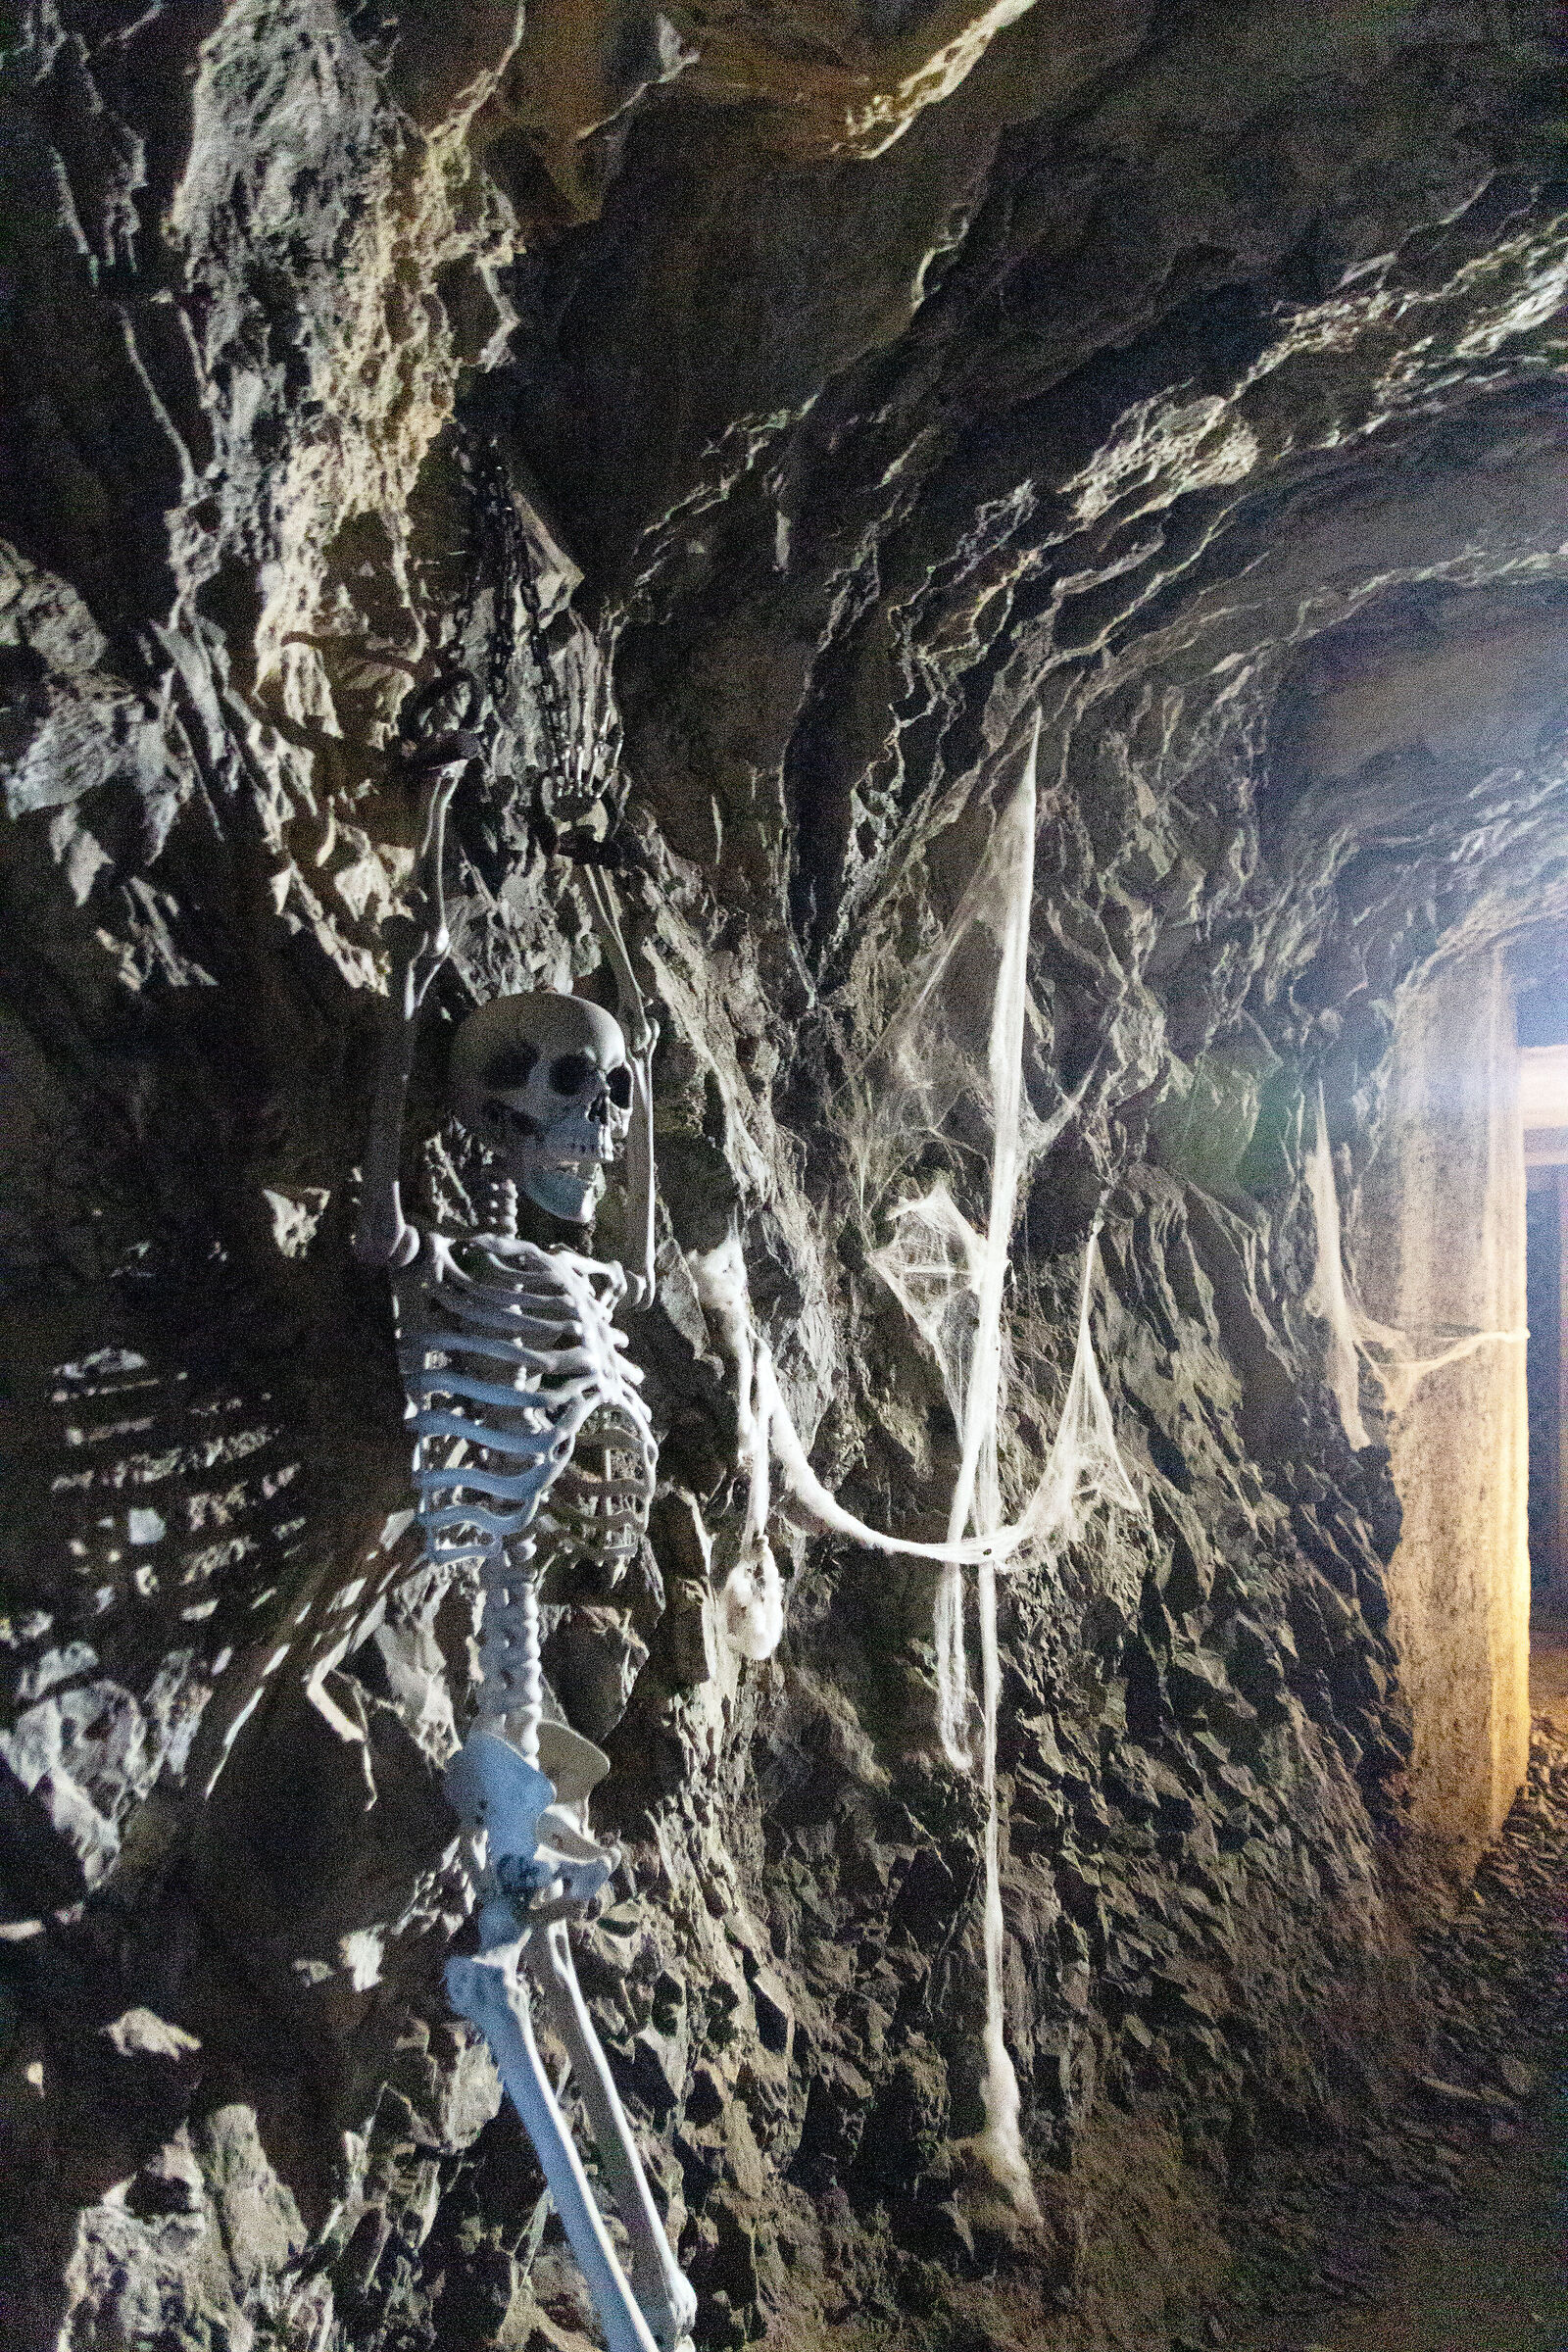 Skeleton in the dungeons of the castle...